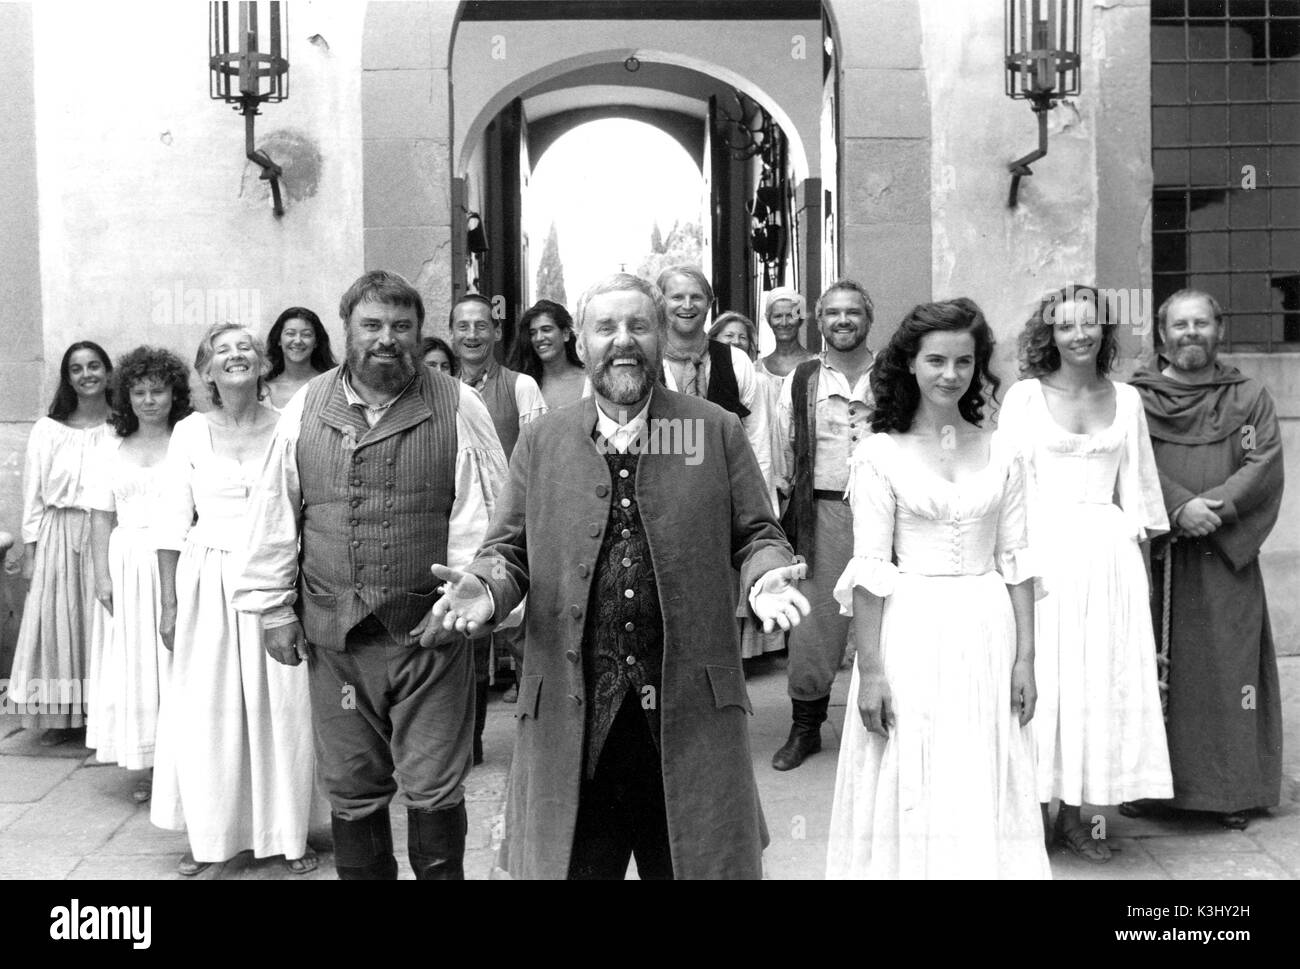 MUCH ADO ABOUT NOTHING  IMELDA STAUNTON, PHYLLIDA LAW, BRIAN BLESSED, RICHARD BRIERS, KATE BECKINSALE, EMMA THOMPSON, JIMMY YUILL Stock Photo